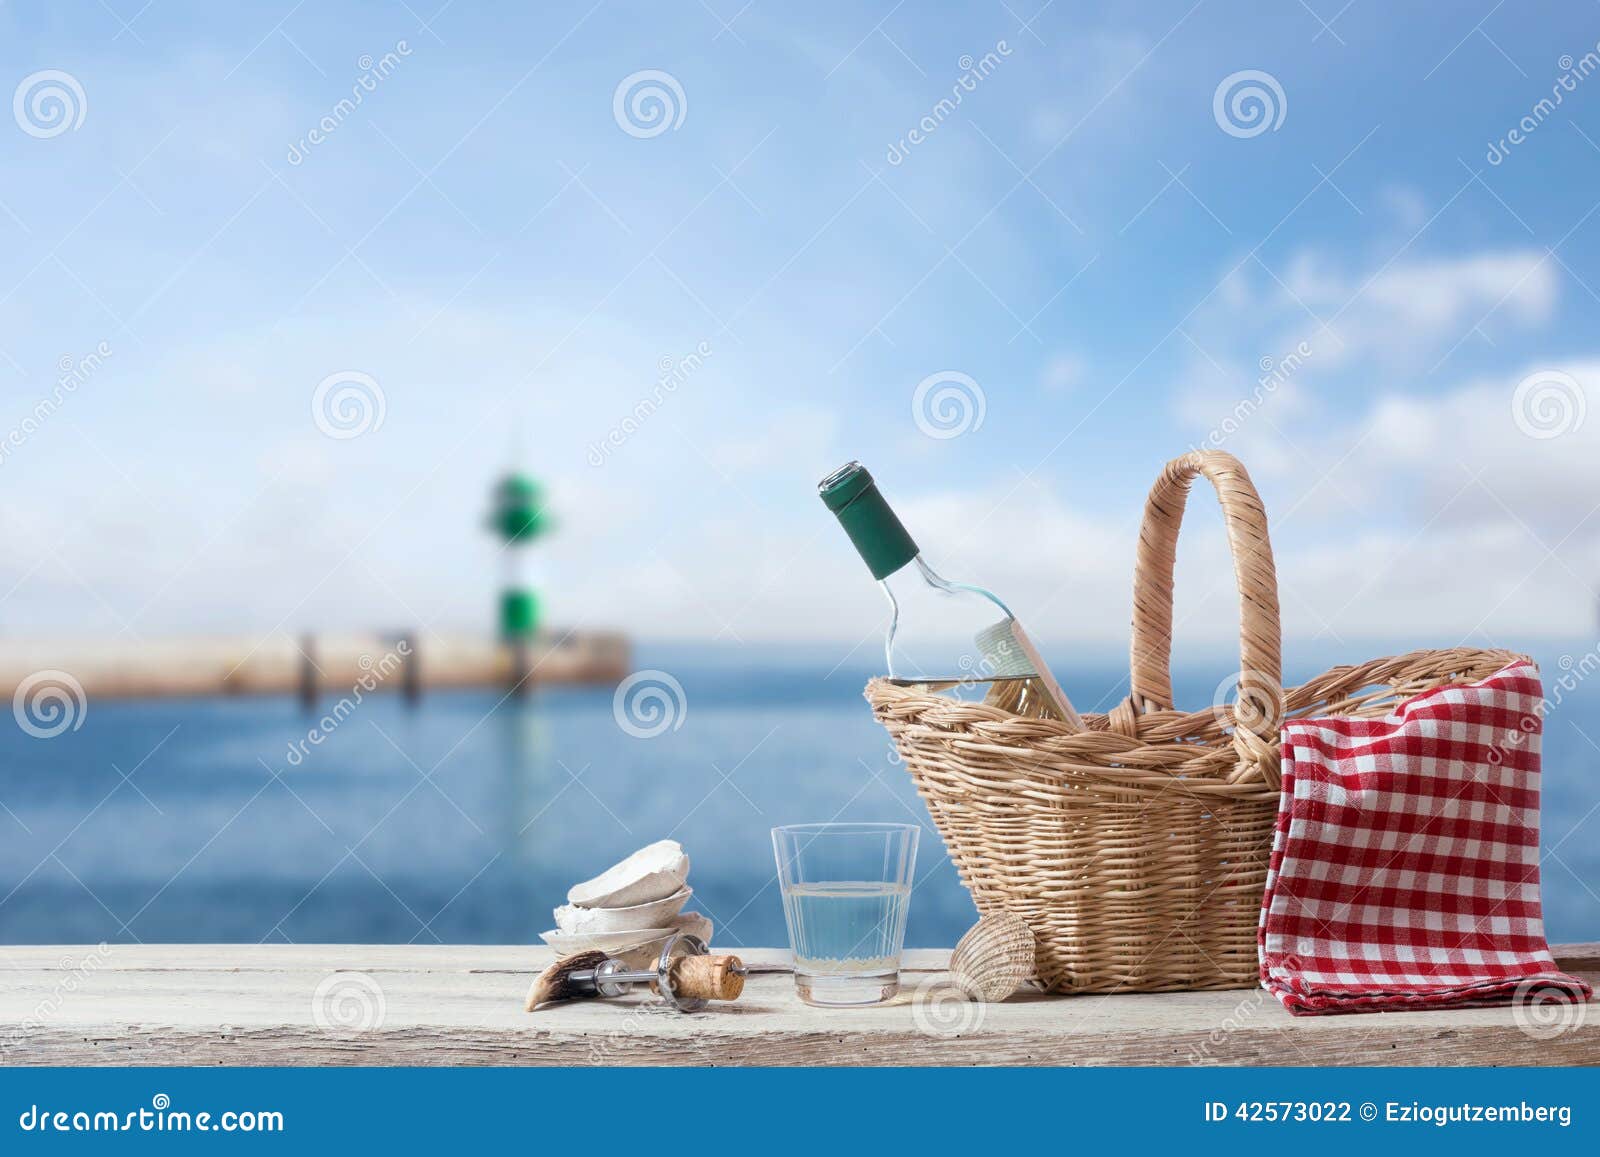 Picnic for One Person at the Sea Stock Photo - Image of bachelorette ...